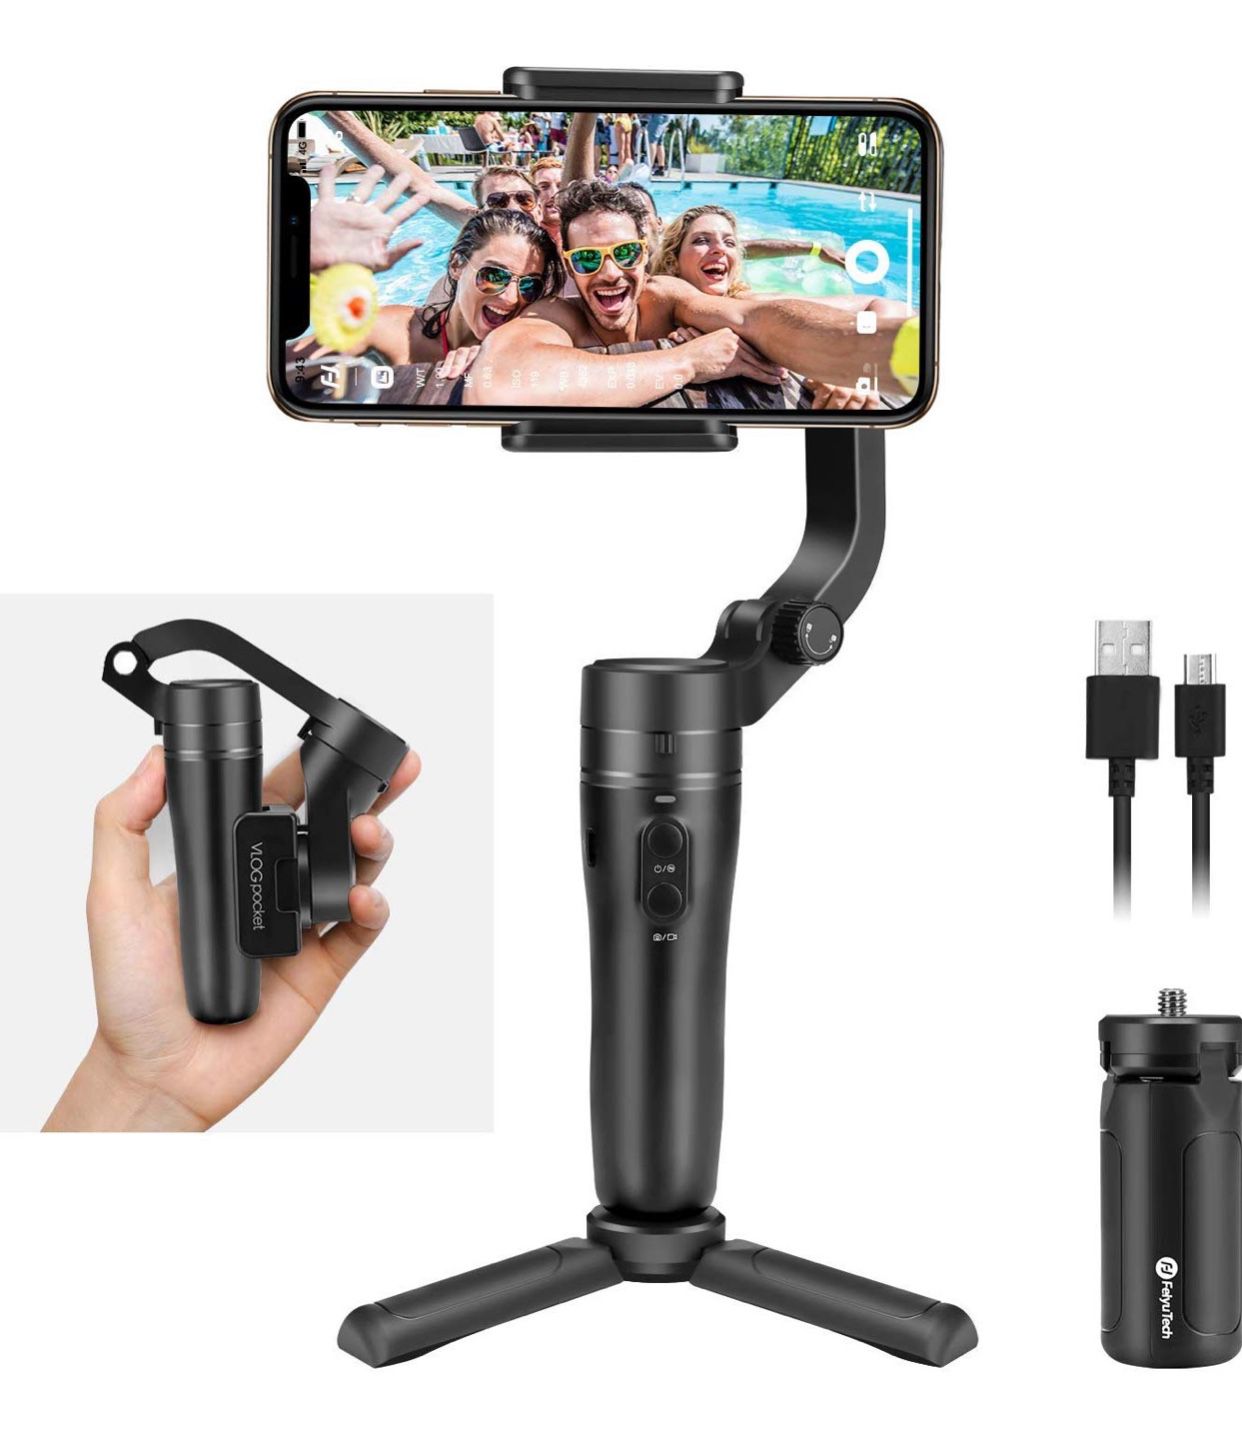 VLOG pocket Handheld Gimbal Stabilizer Foldable Pocket-Size 3-Axis with One Key Orientation Toggle for iPhone 11/ 11 Pro/ 11 pro Max and Android Smar